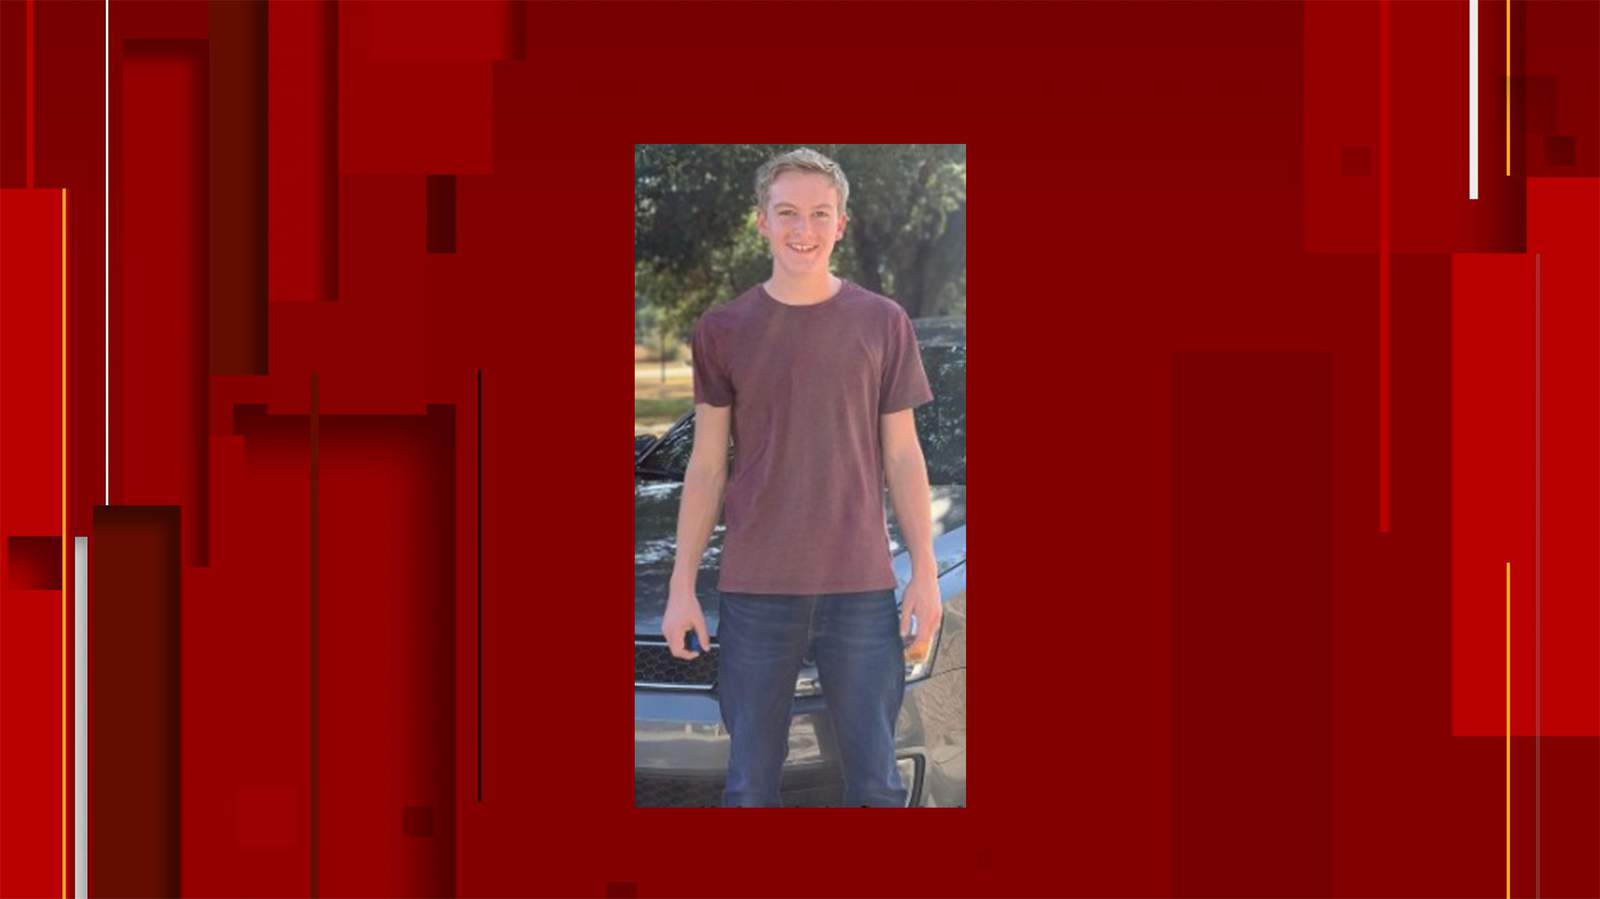 Missing 17-year-old in Hays County found safe, officials say